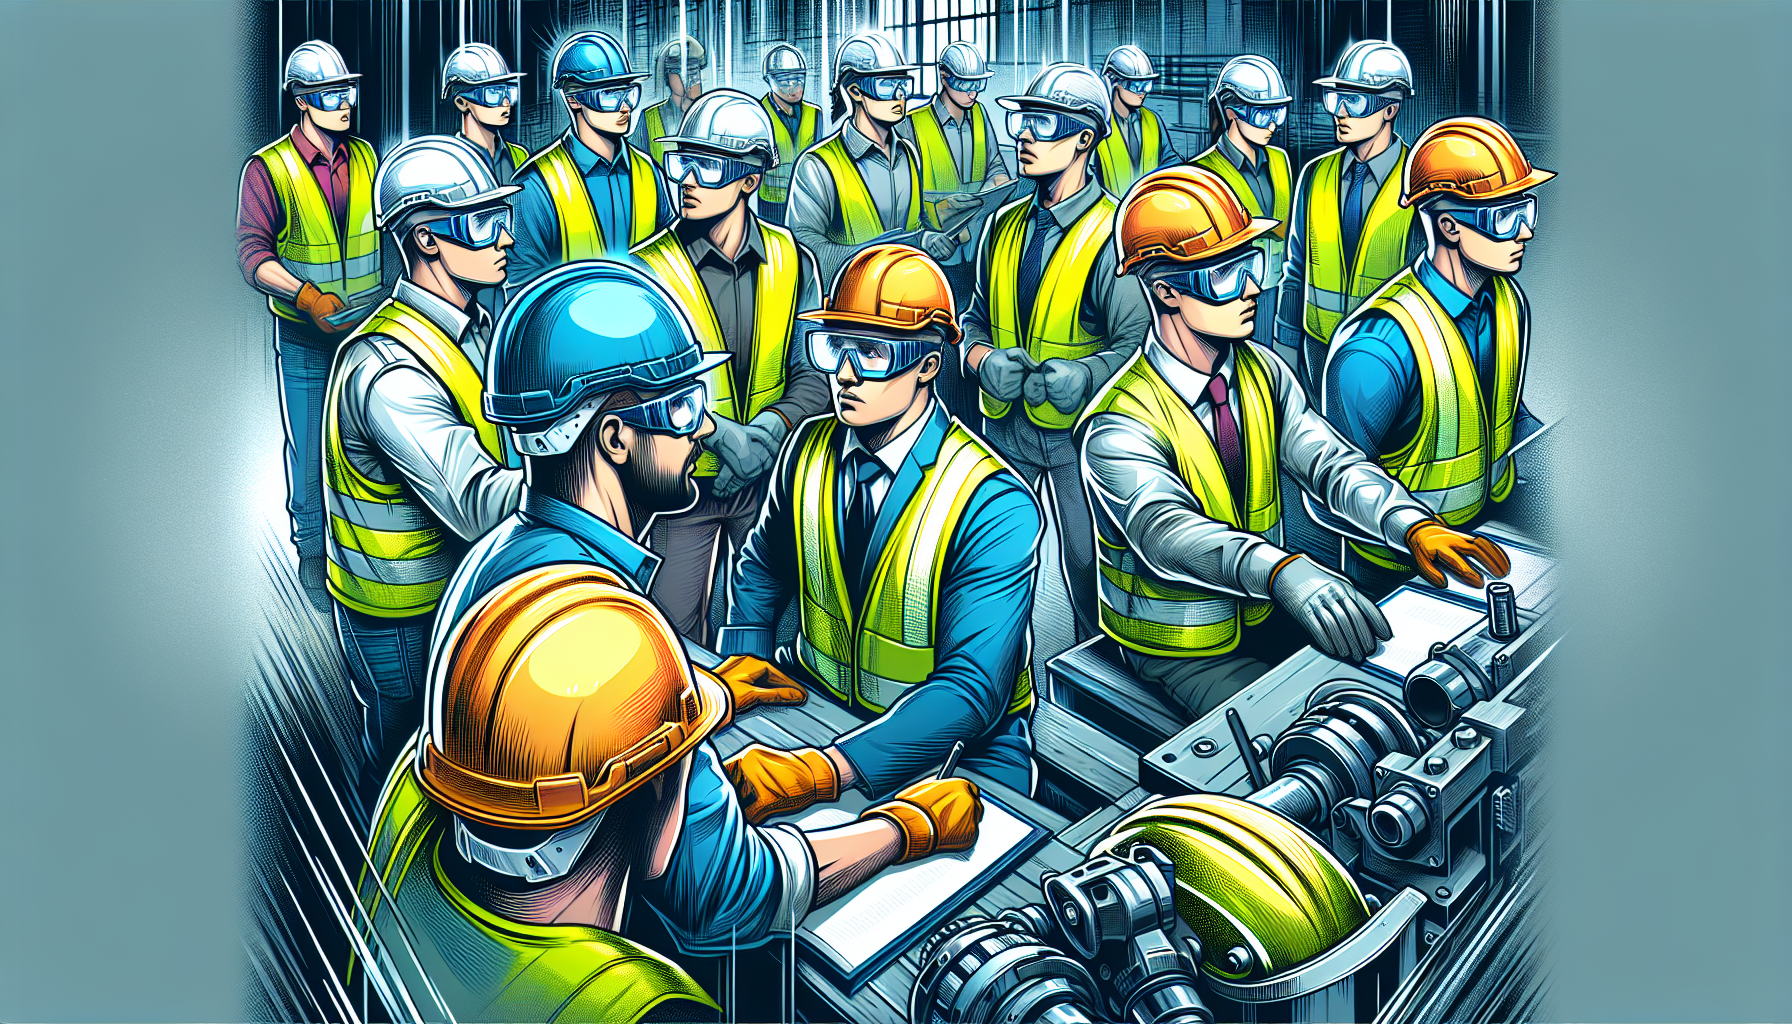 Illustration of workers participating in safety training with protective gear